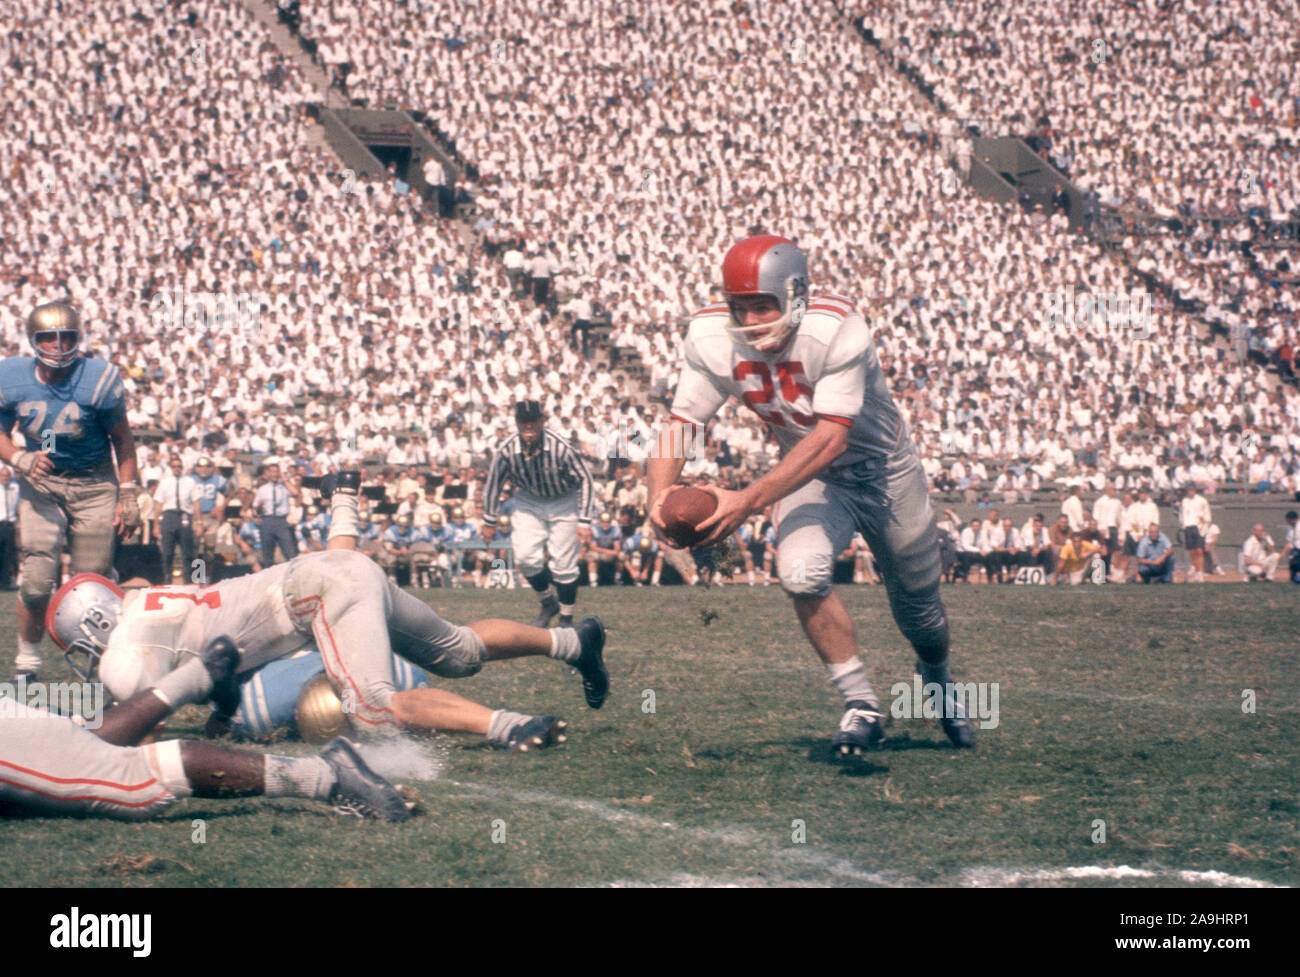 los-angeles-ca-october-6-john-mummey-25-of-the-ohio-state-buckeyes-runs-with-the-ball-during-an-ncaa-game-against-the-ucla-bruins-on-october-6-1962-at-the-los-angeles-memorial-coliseum-in-los-angeles-california-photo-by-hy-peskin-set-number-x8760-local-caption-john-mummey-2A9HRP1.jpg